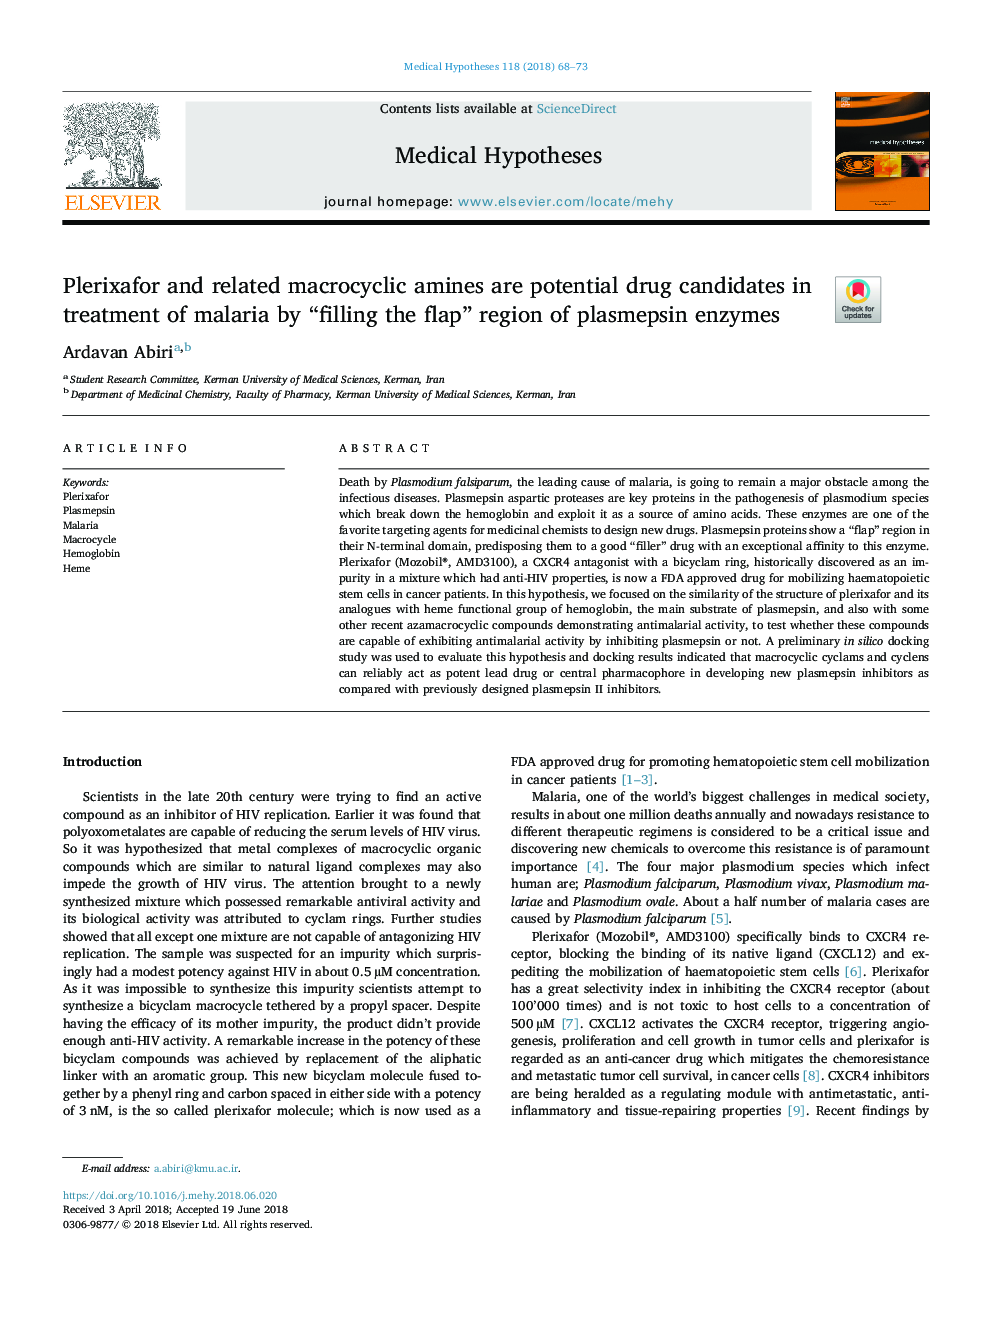 Plerixafor and related macrocyclic amines are potential drug candidates in treatment of malaria by “filling the flap” region of plasmepsin enzymes